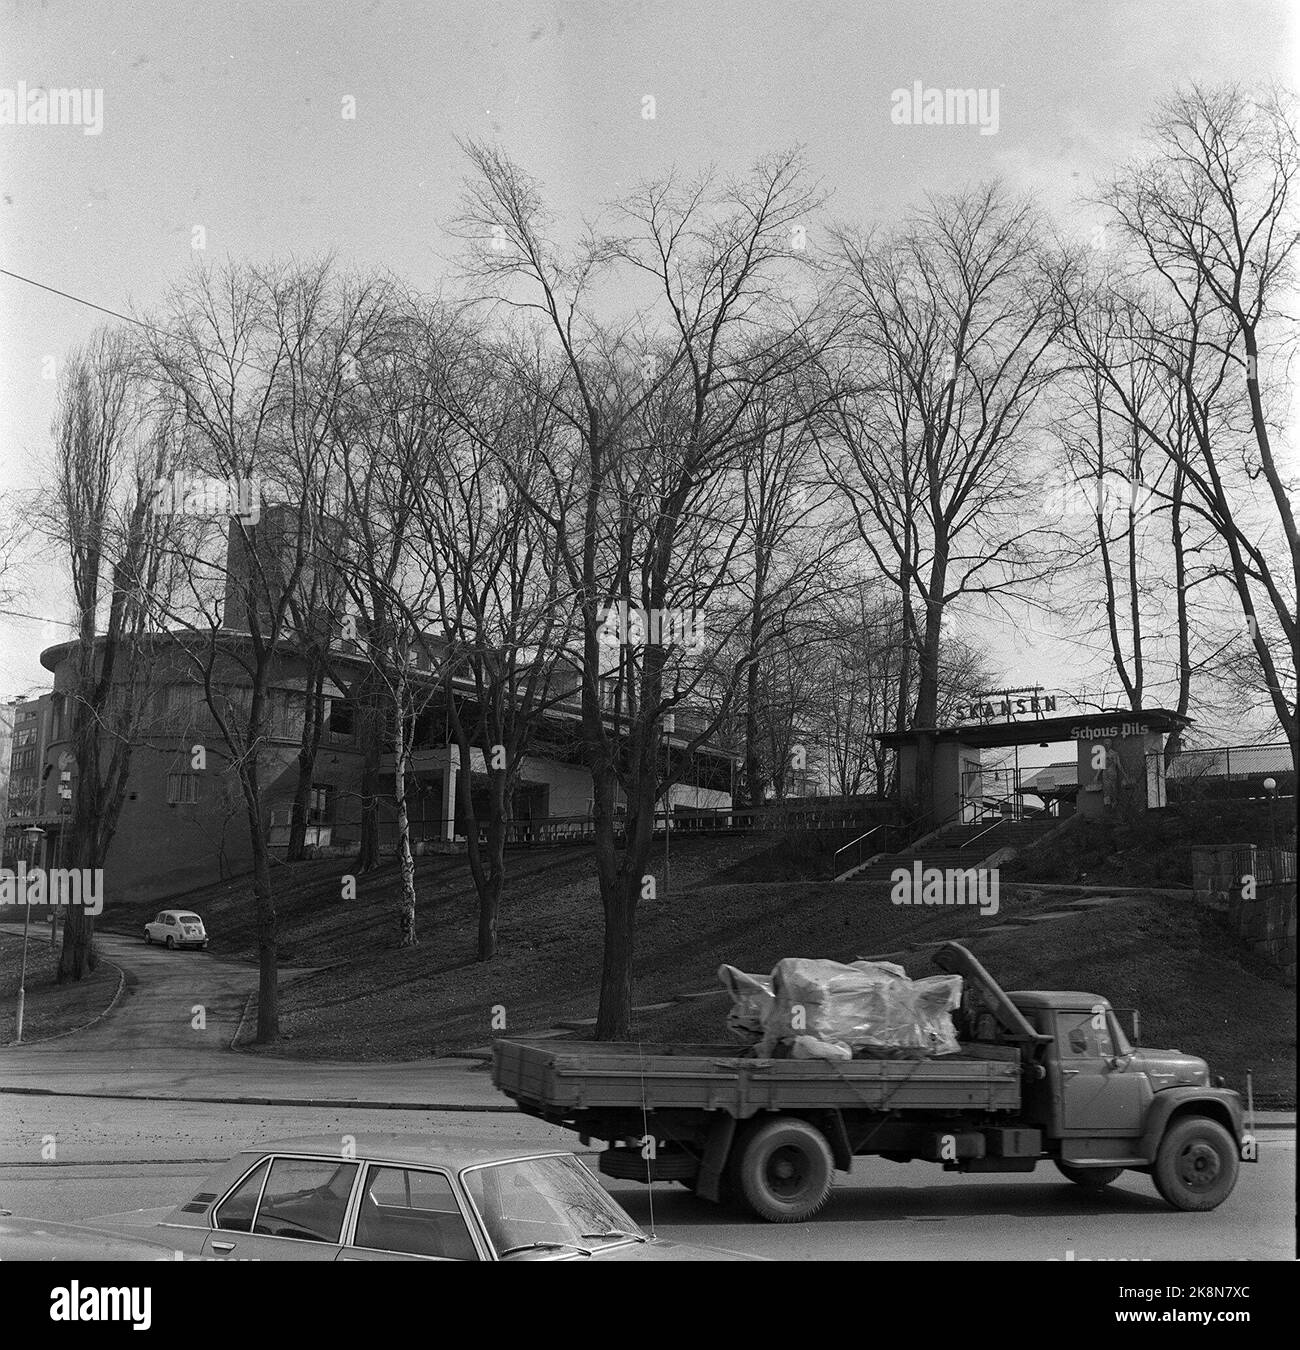 Oslo 21.04.1970. Restaurant Skansen, Norway's first funk building. Architect: Lars Backer. Listed in 1927, demolished in 1970. The youth restaurant 'Rondo' from 1962-1967 (Rondo TV, Skansen Th) Stock Photo: NTB / NTB Stock Photo